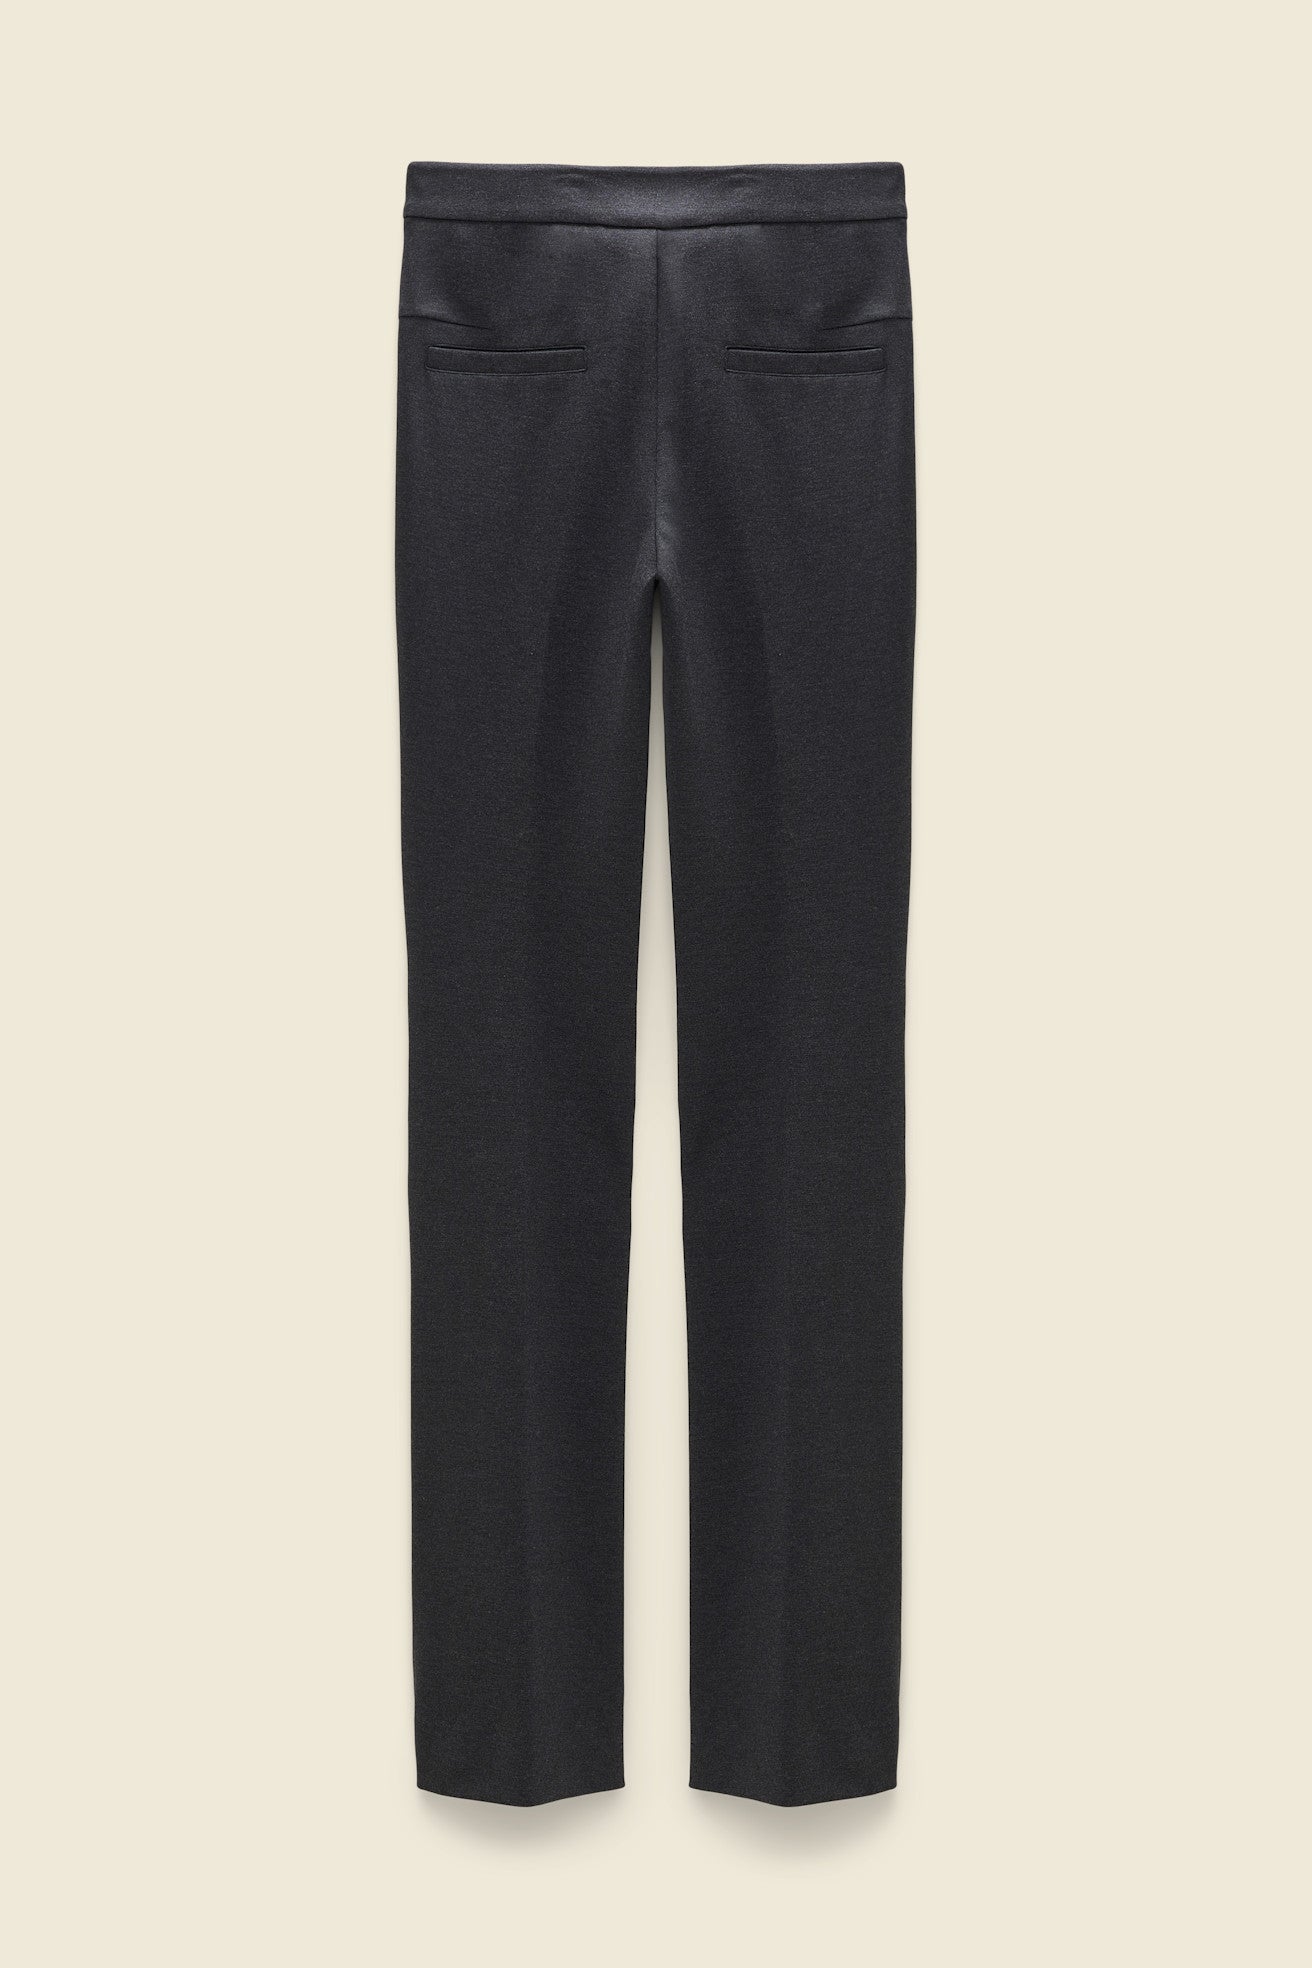 Emotional Essence pants by Dorothee Schumacher